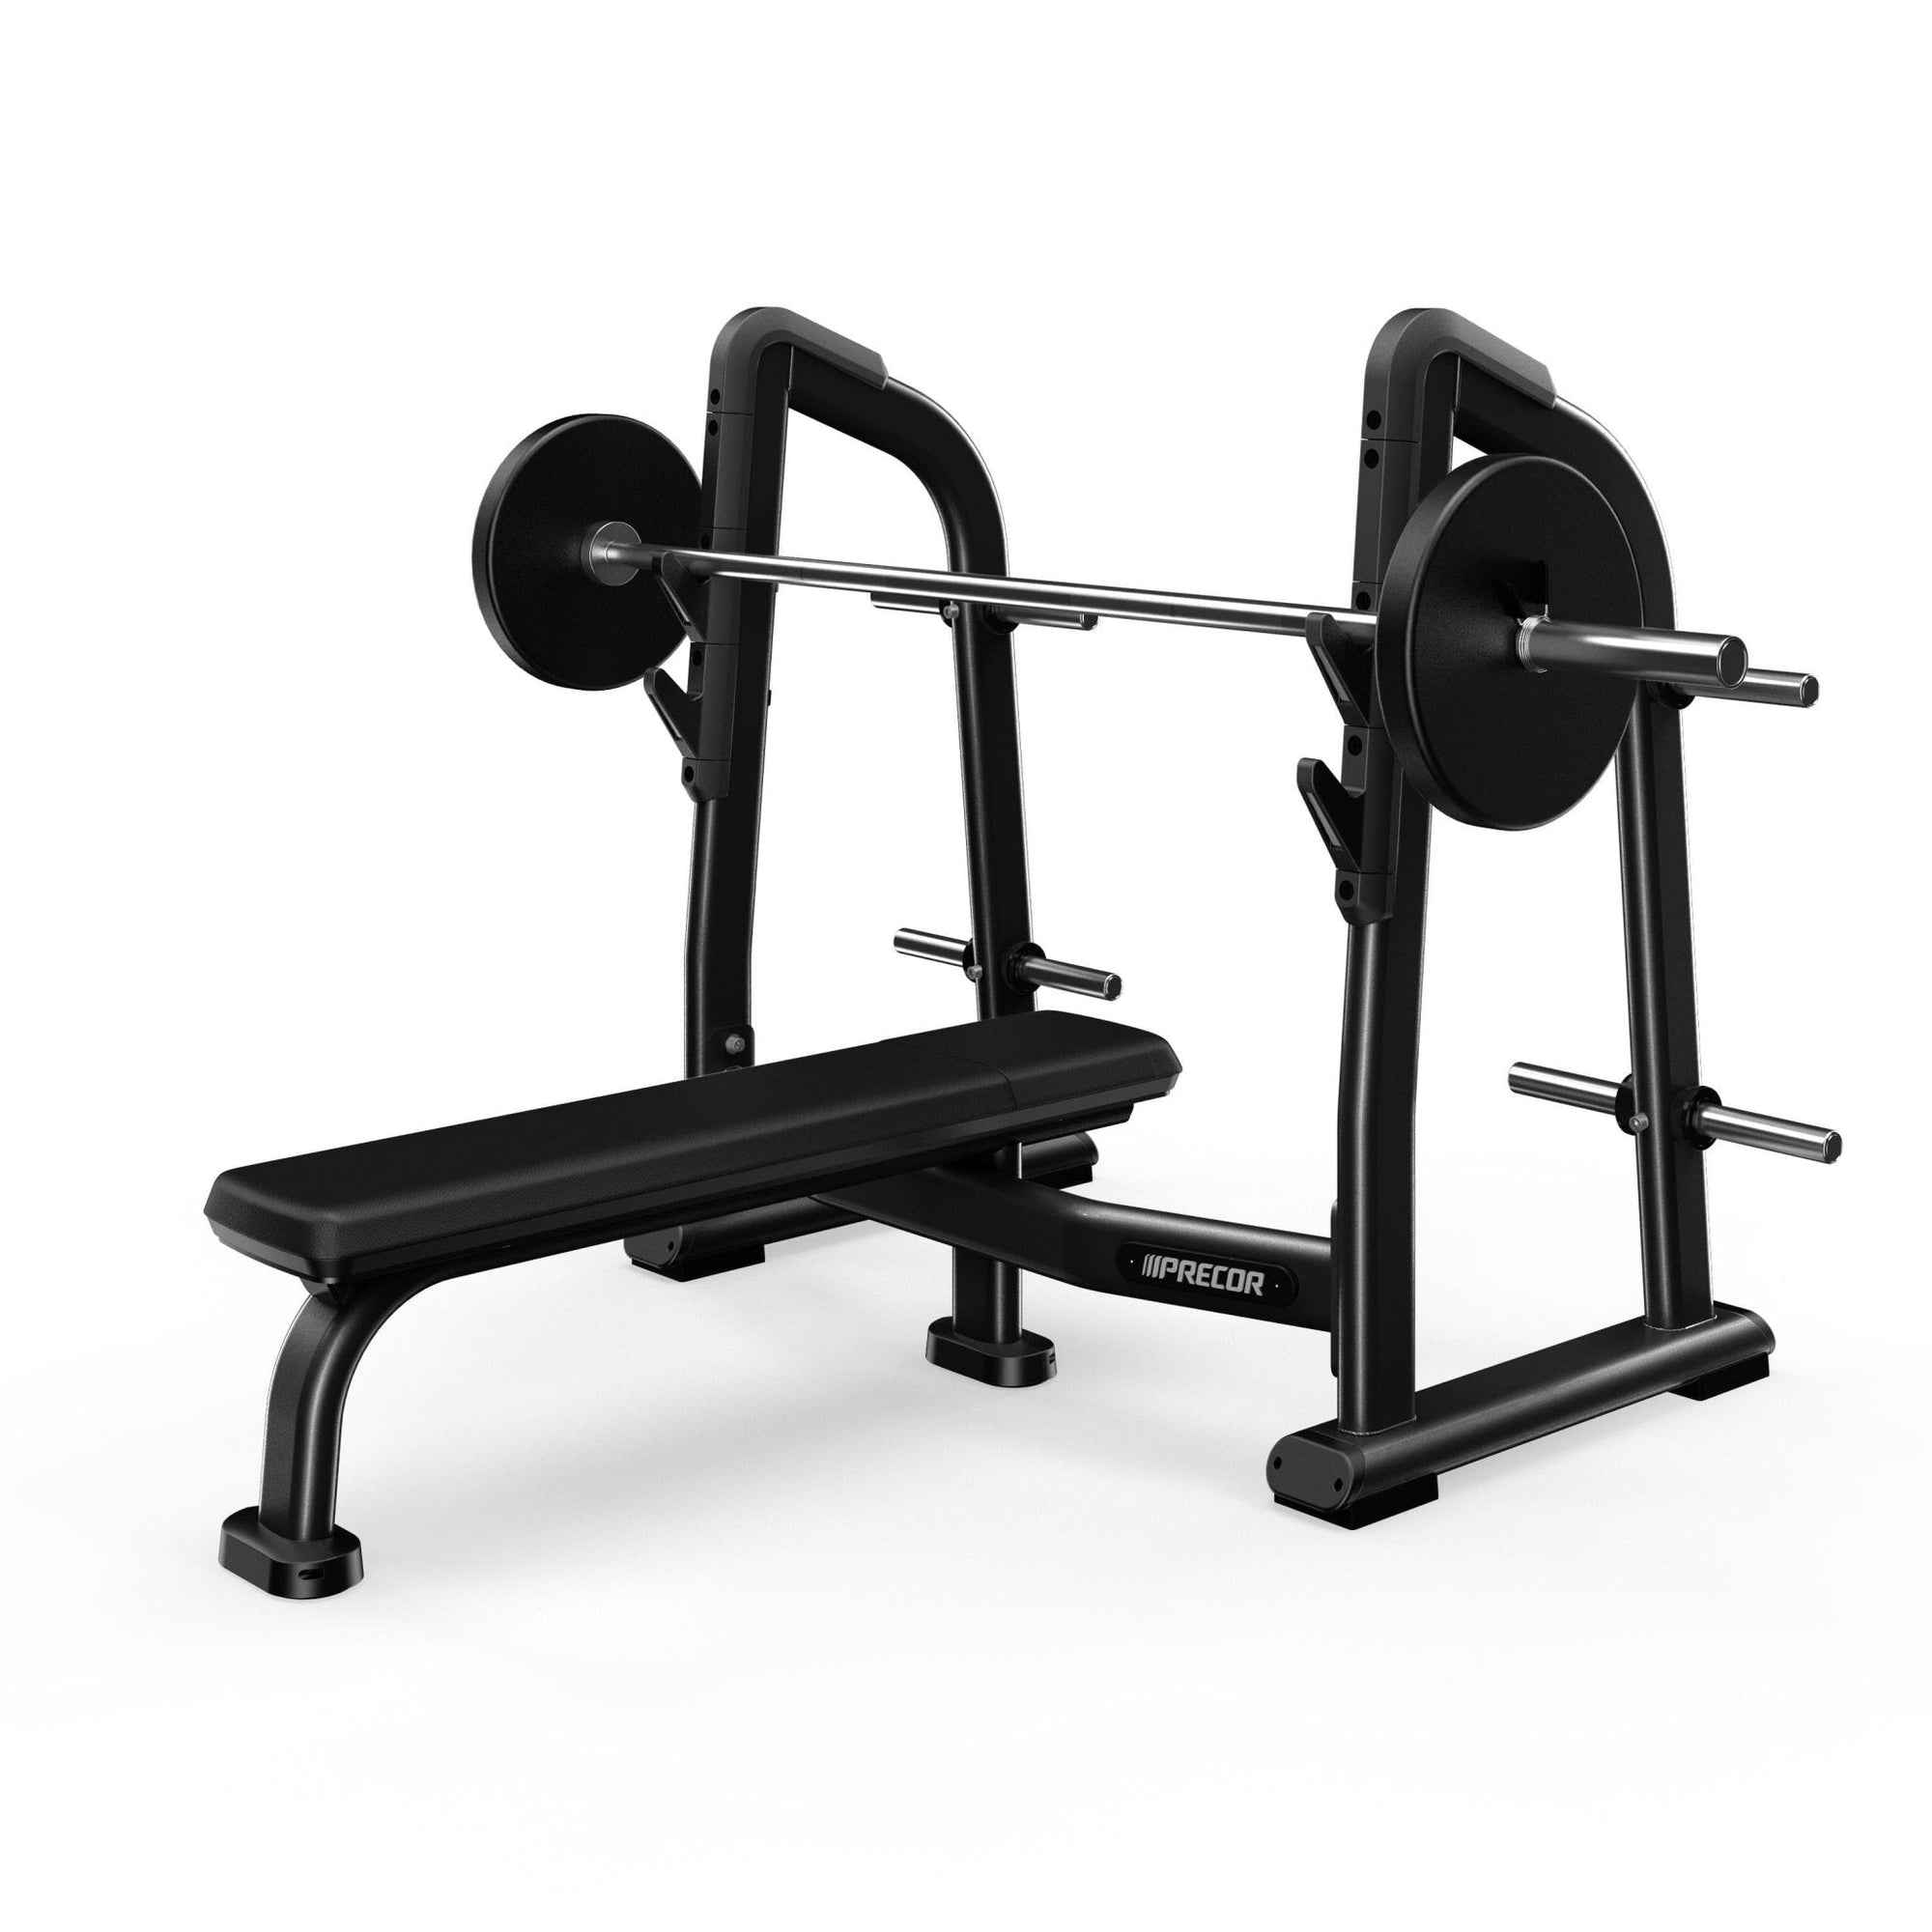 Precor Discovery Series Olympic Flat Bench (DBR408) Weight Bench Precor Silver